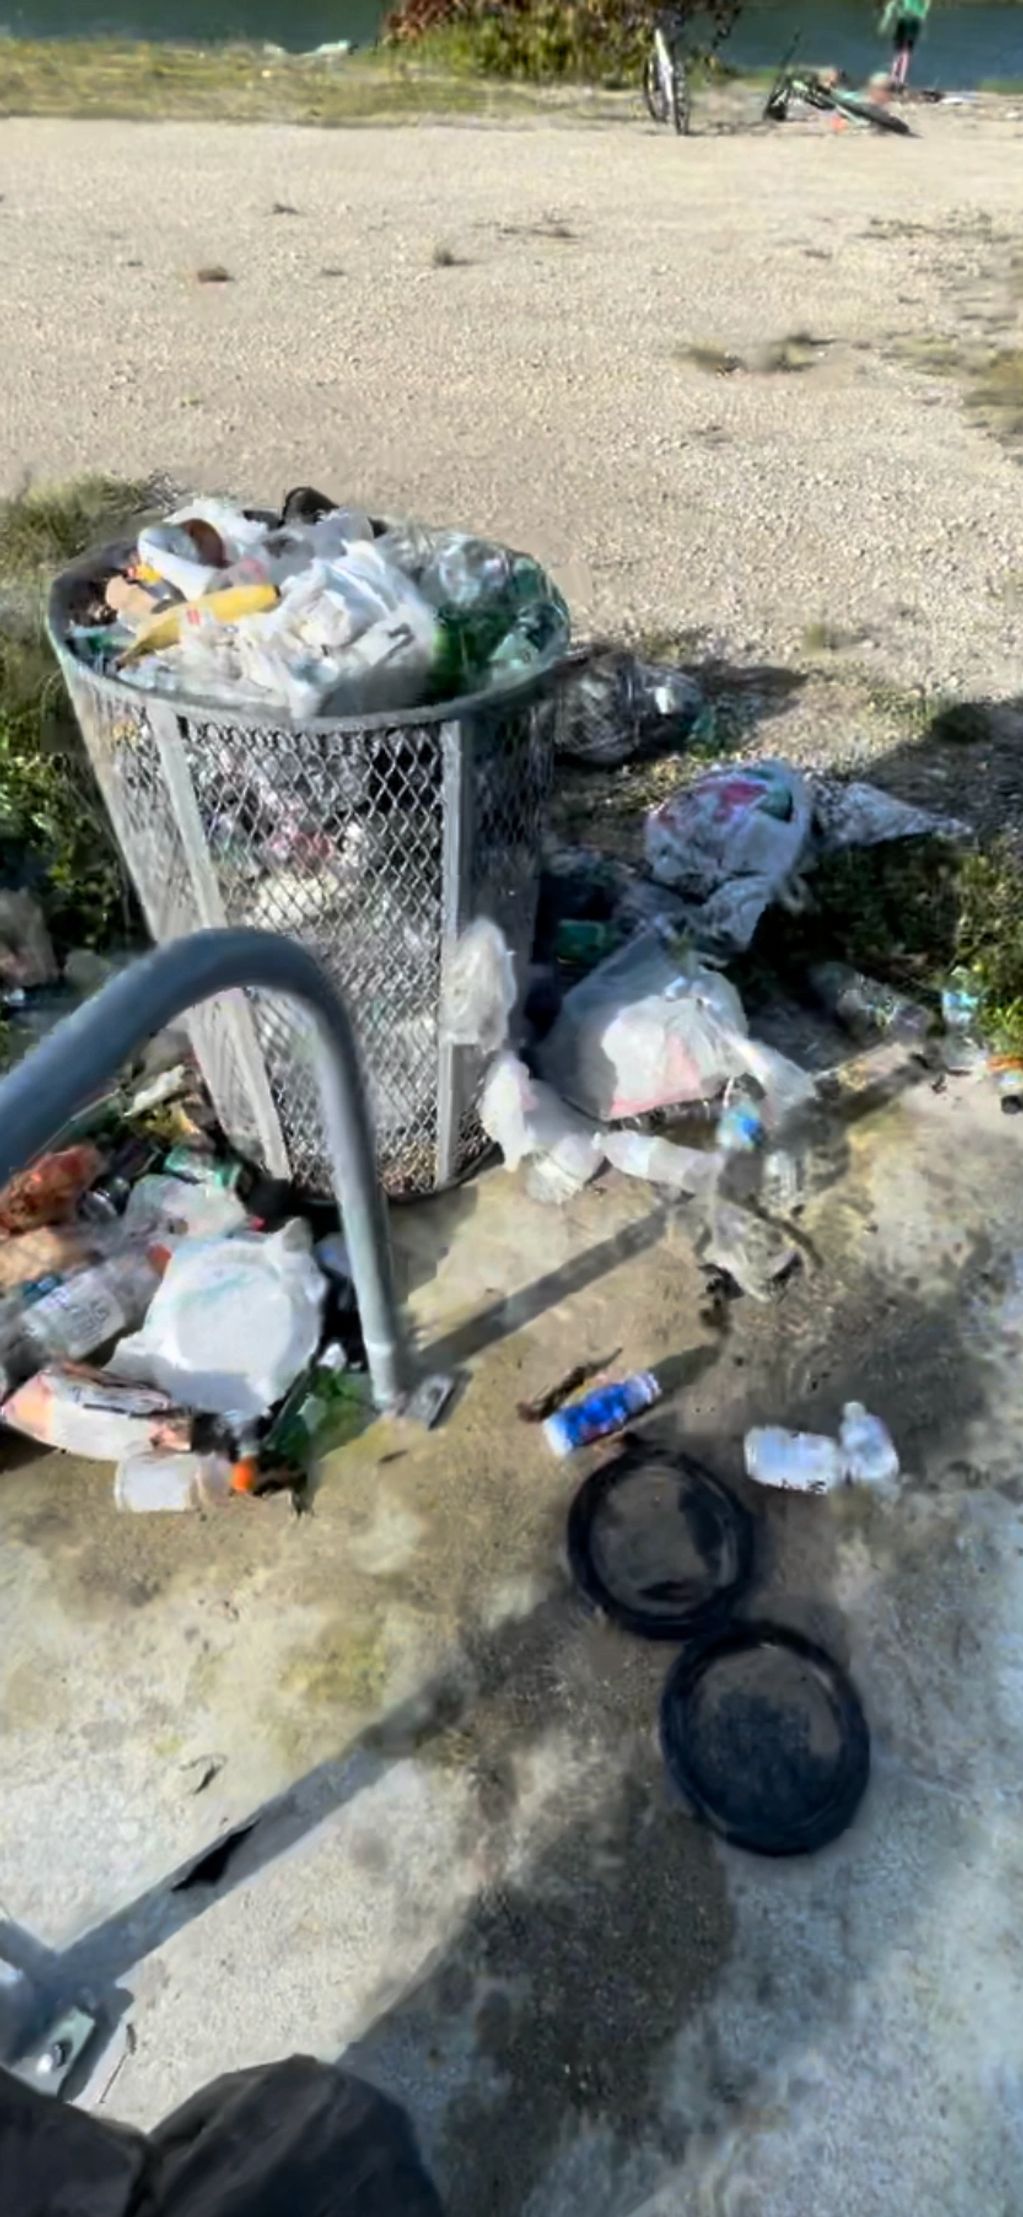 Trash scattered on the grounds from neglected garbage cans at Biscayne National Park FL USA 